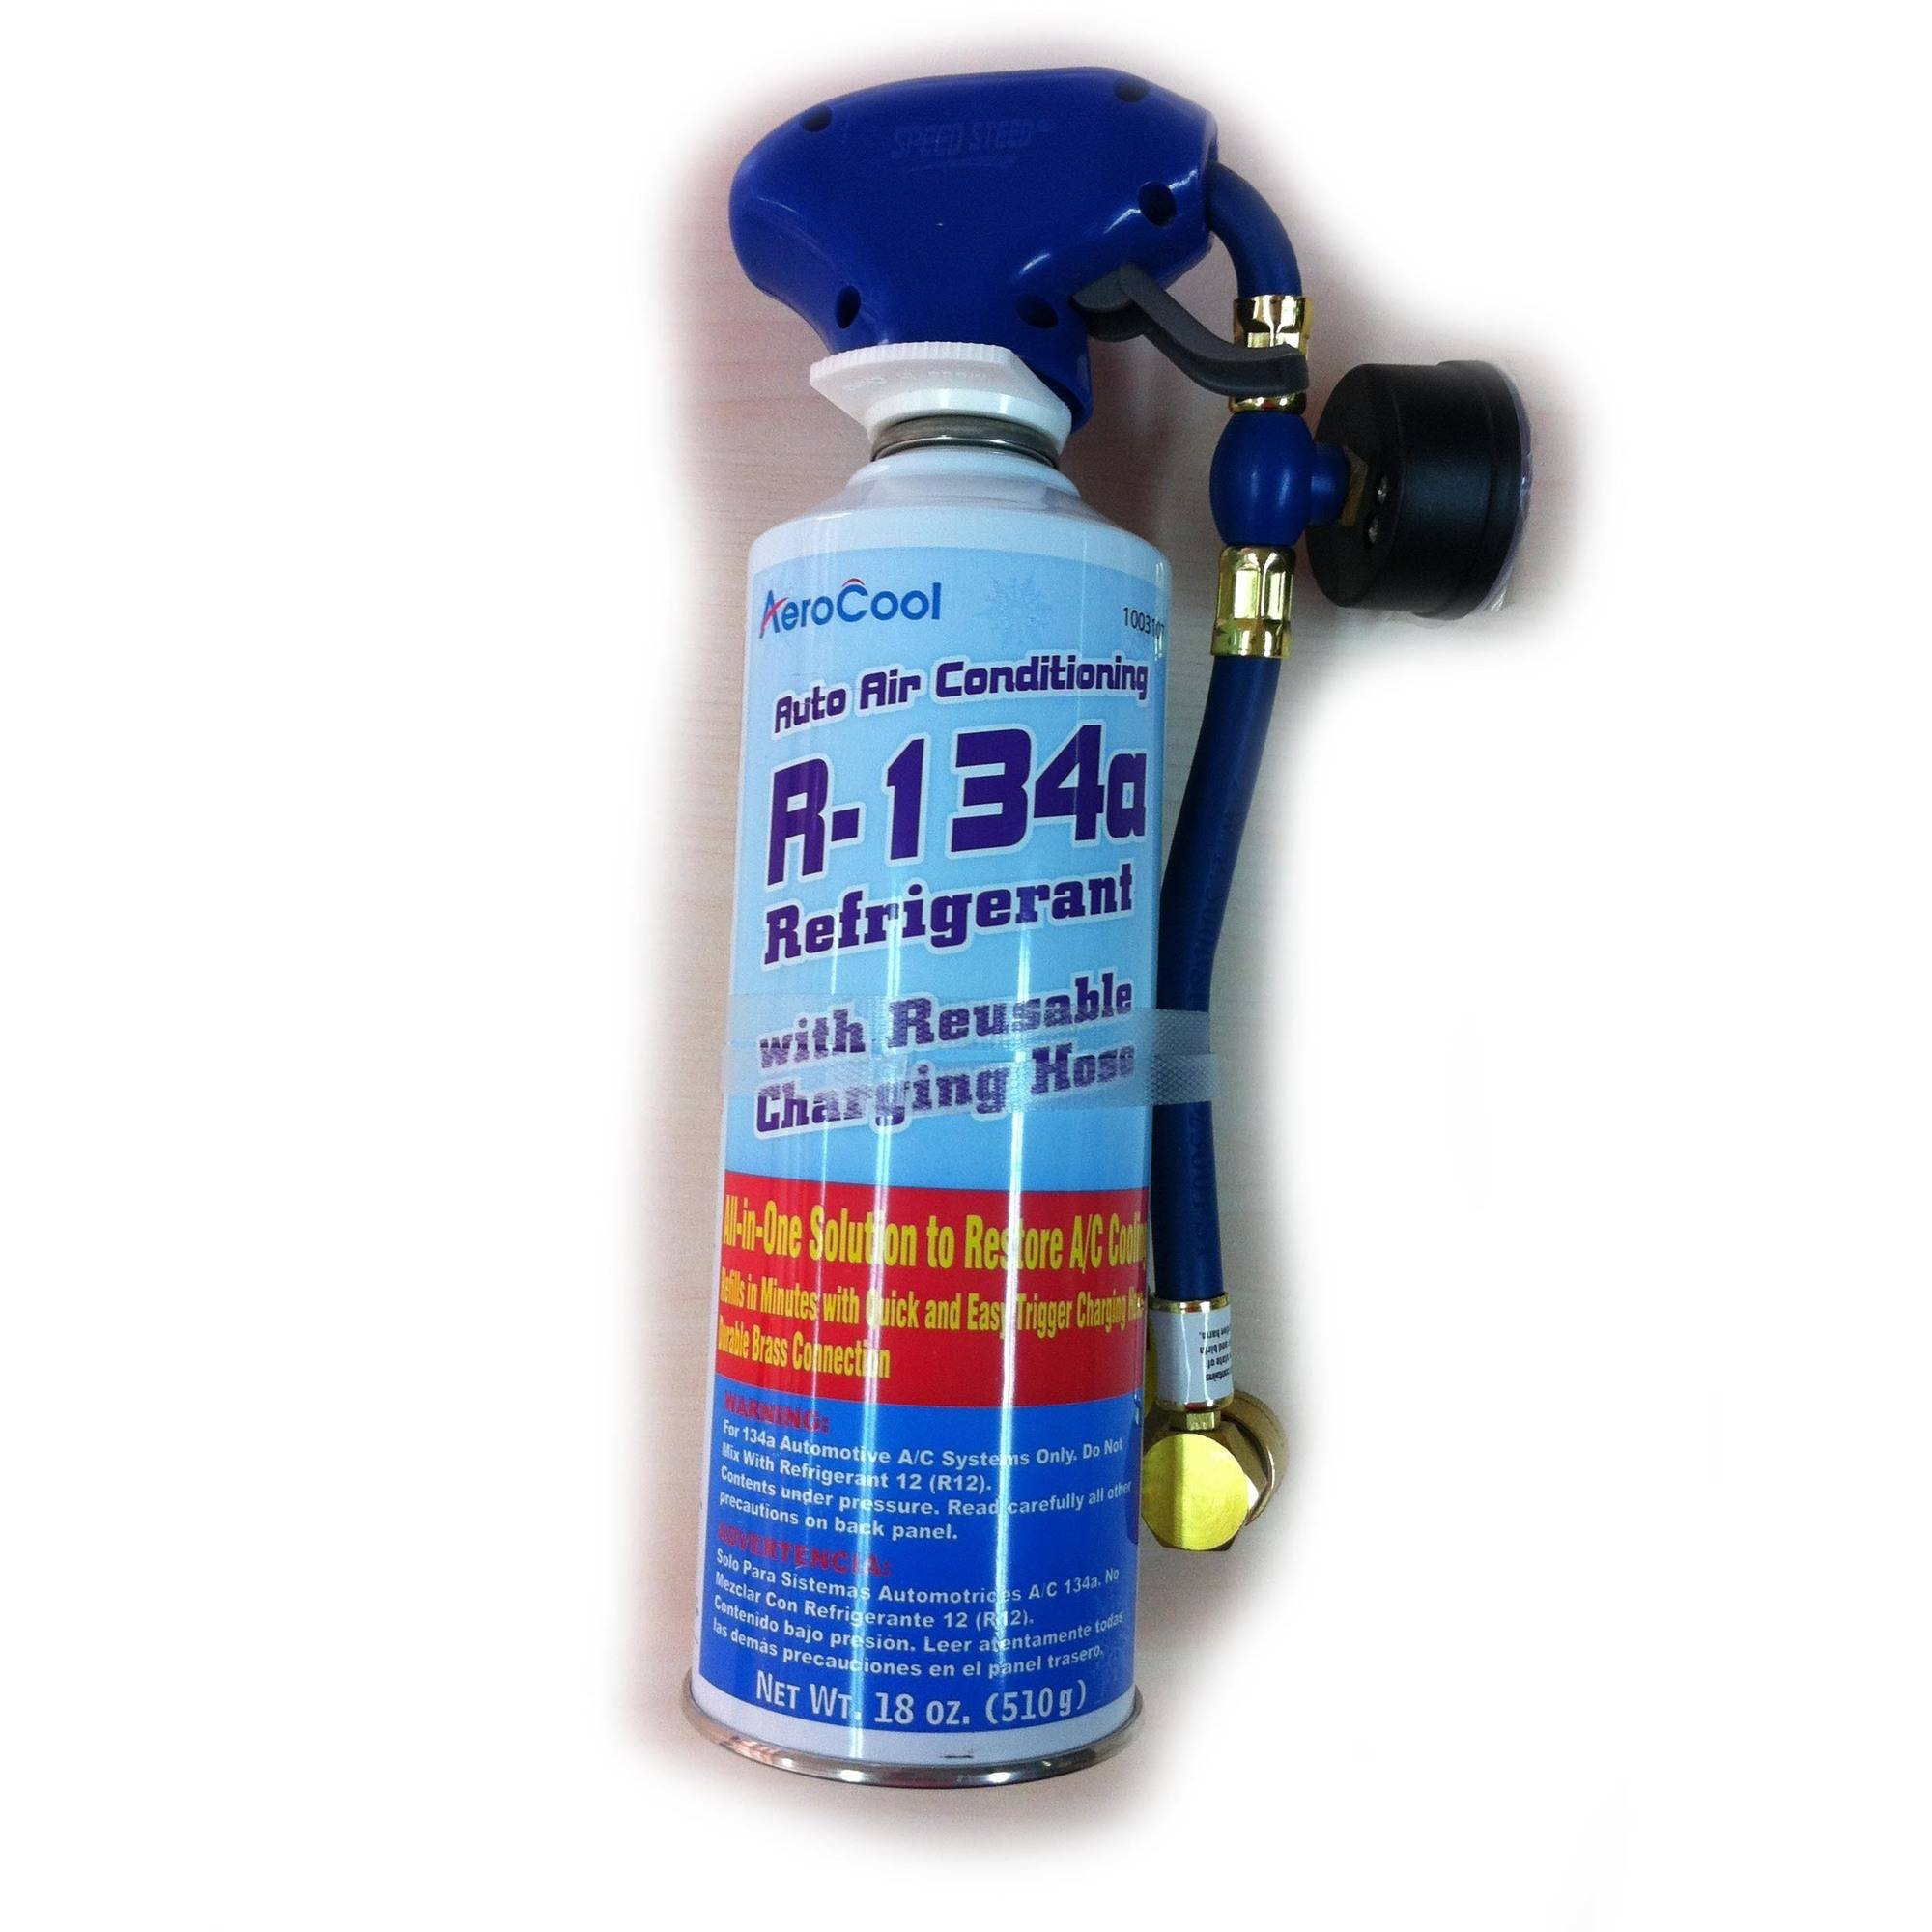 Aero Cool R-134a Auto Air Conditioning Refrigerant with Reusable Charging Hose, 18 Oz.